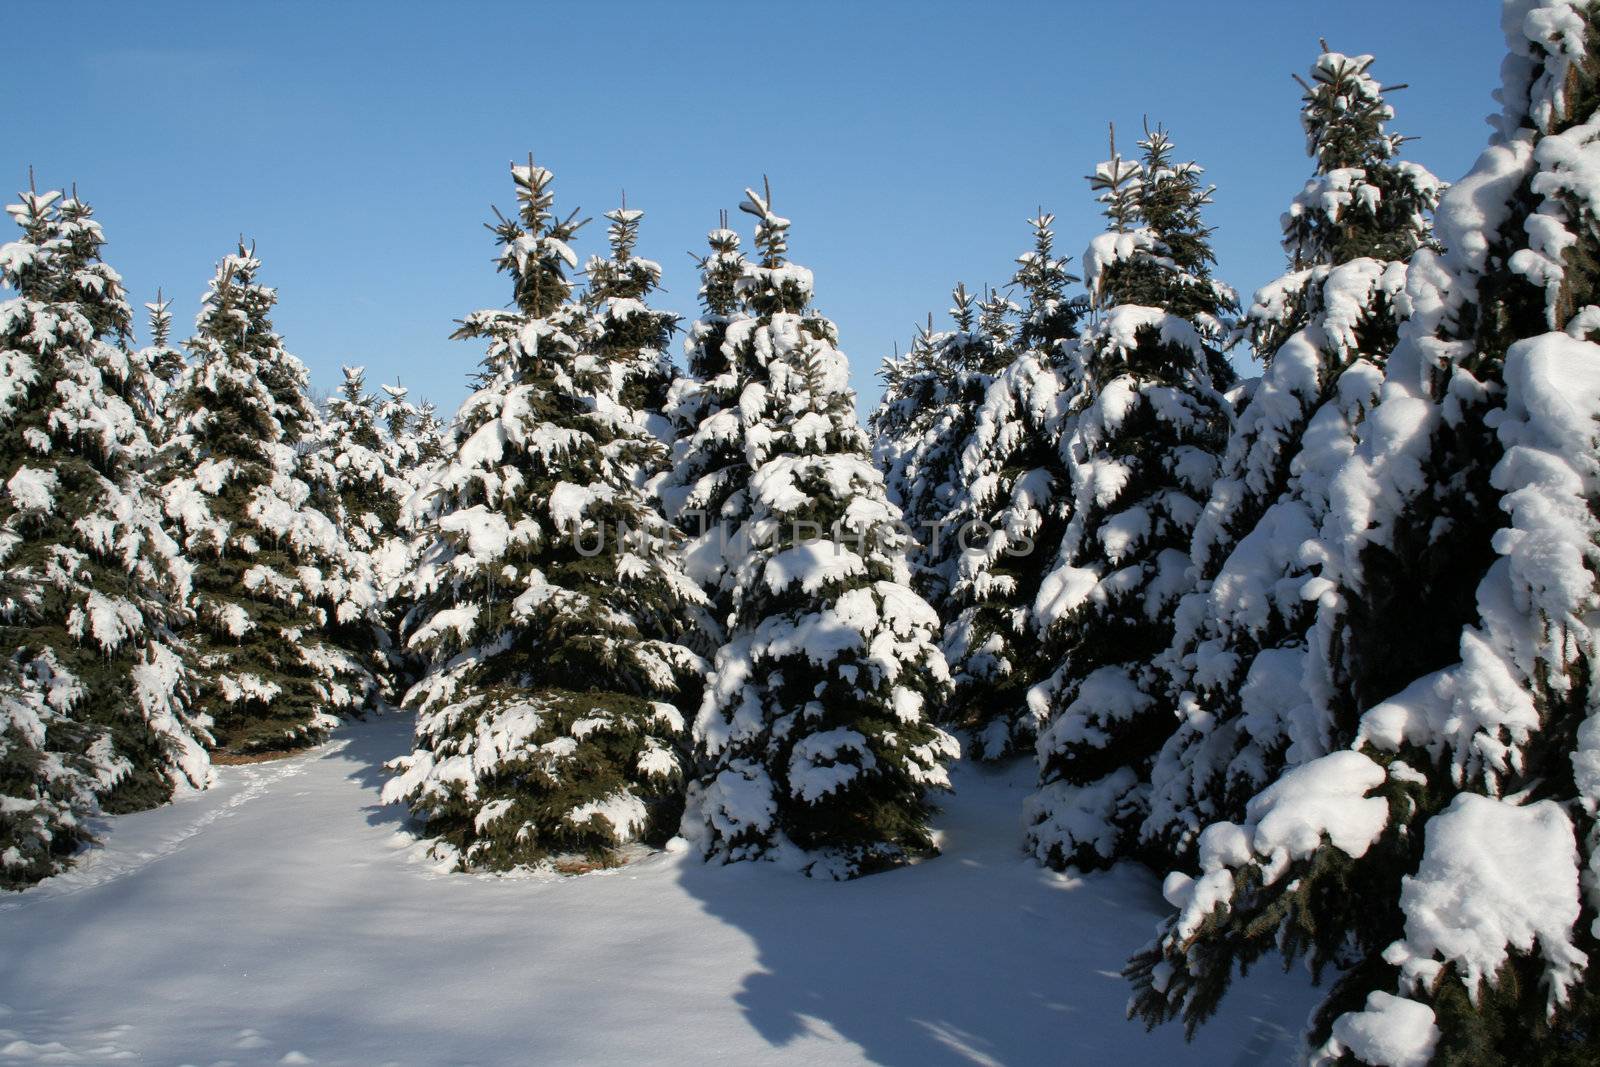 A bunch of snowy evergreens.
